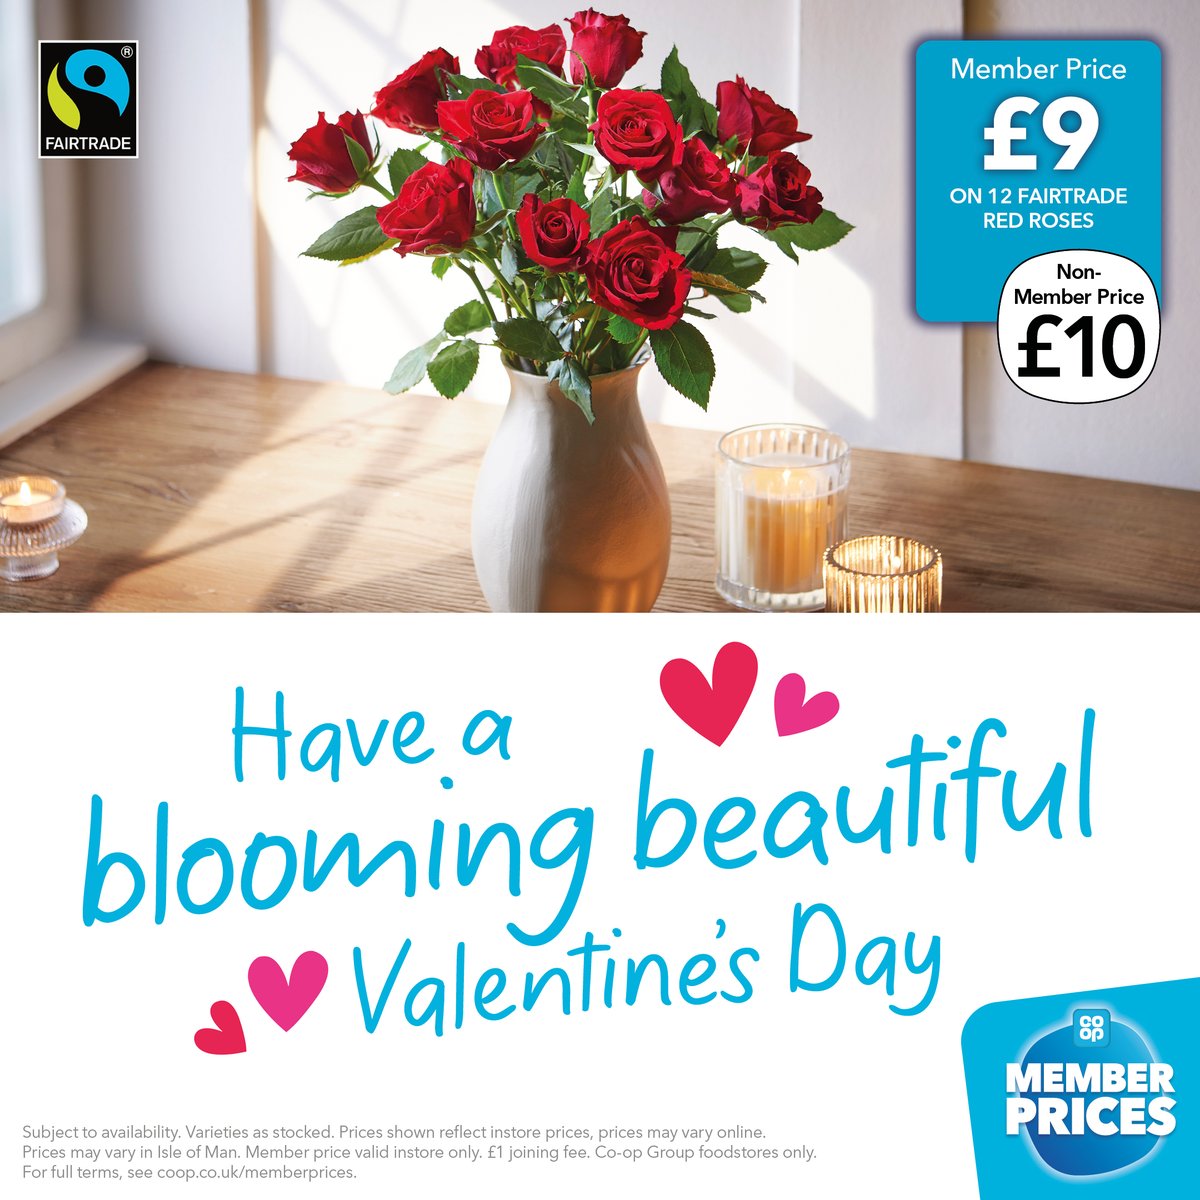 Co-op Members now save on beautiful Fairtrade roses, the perfect gift for Valentine's Day 🌹 Find them in your local Co-op store. Not yet a @coopuk Member? Sign up today 👉 coop.co.uk/membership